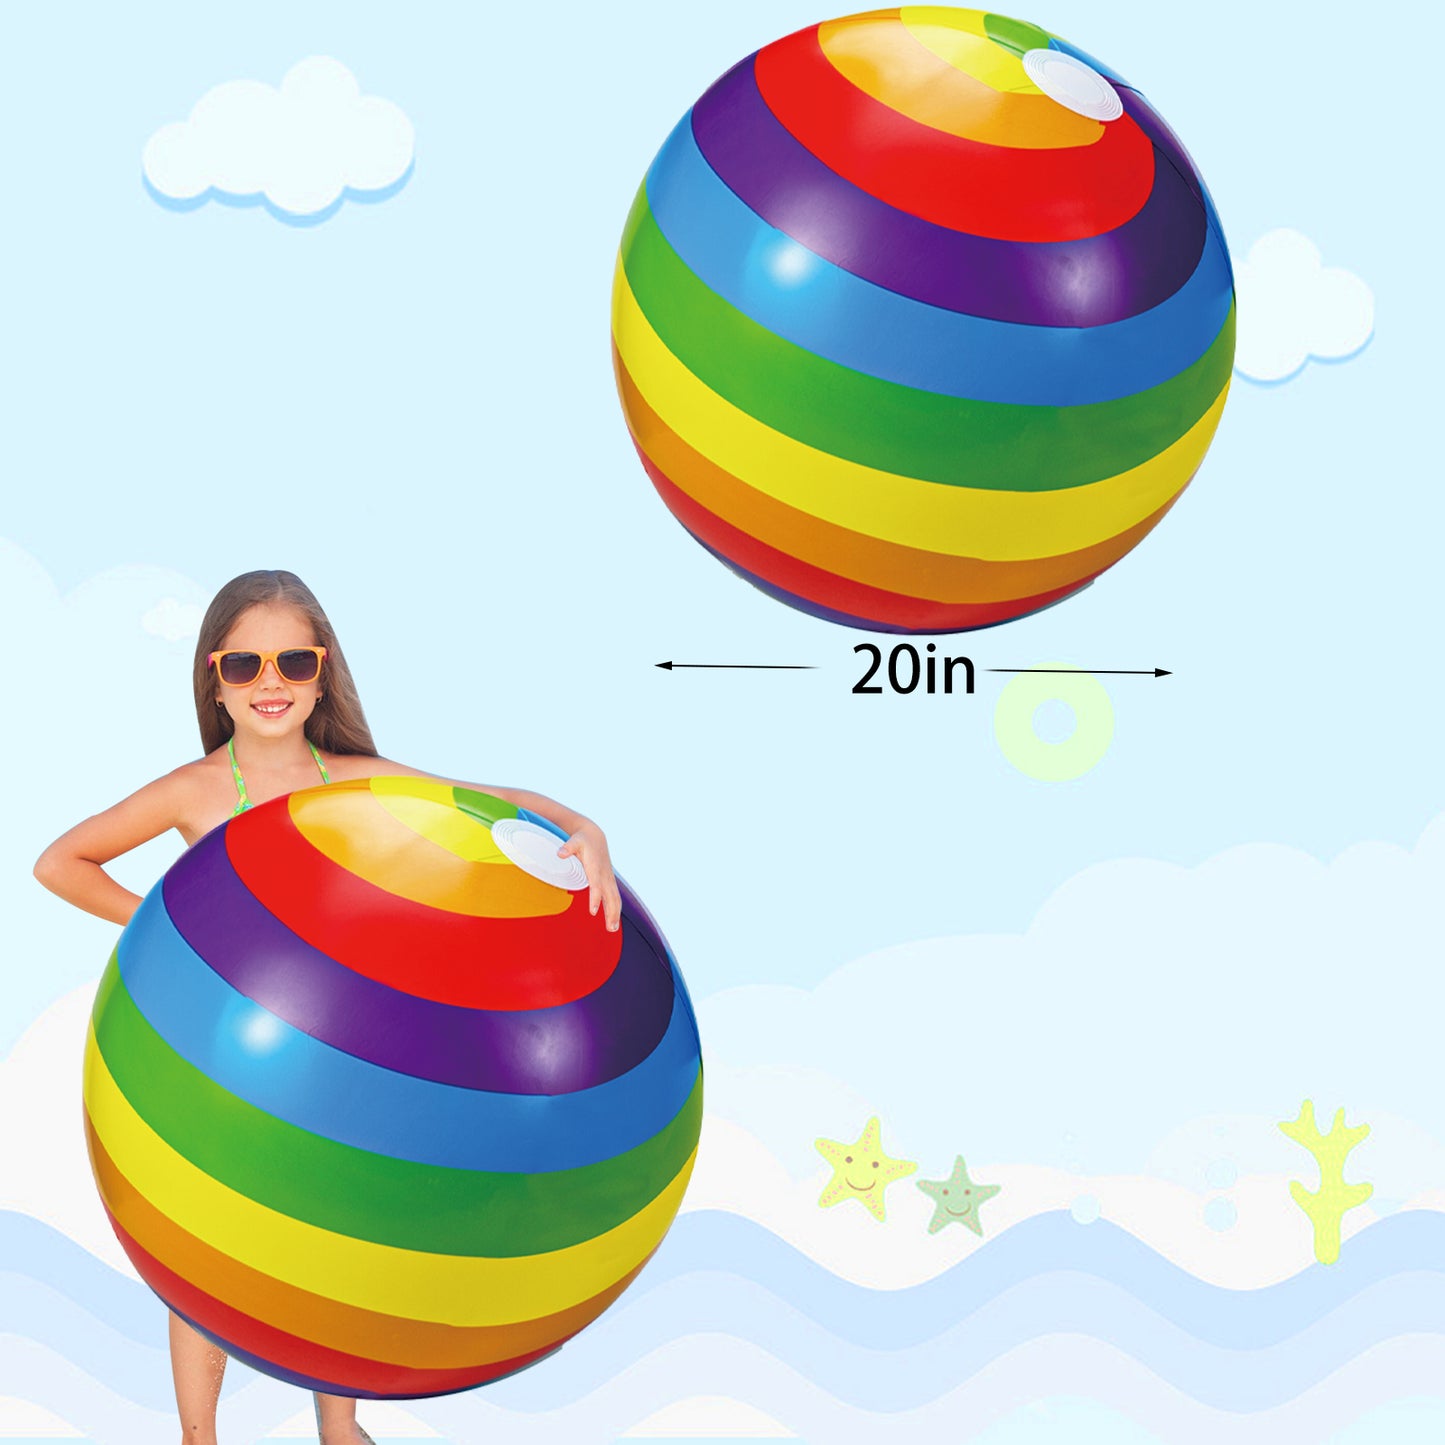 "Beach Ball- Big Inflatable Sports Ball Pool Toys Rainbow Beachball 26 inch, Outdoor Pool Balls for Kids and Adults Summer Water Toys Beach Pool Party Decorations 21"" After Inflated "